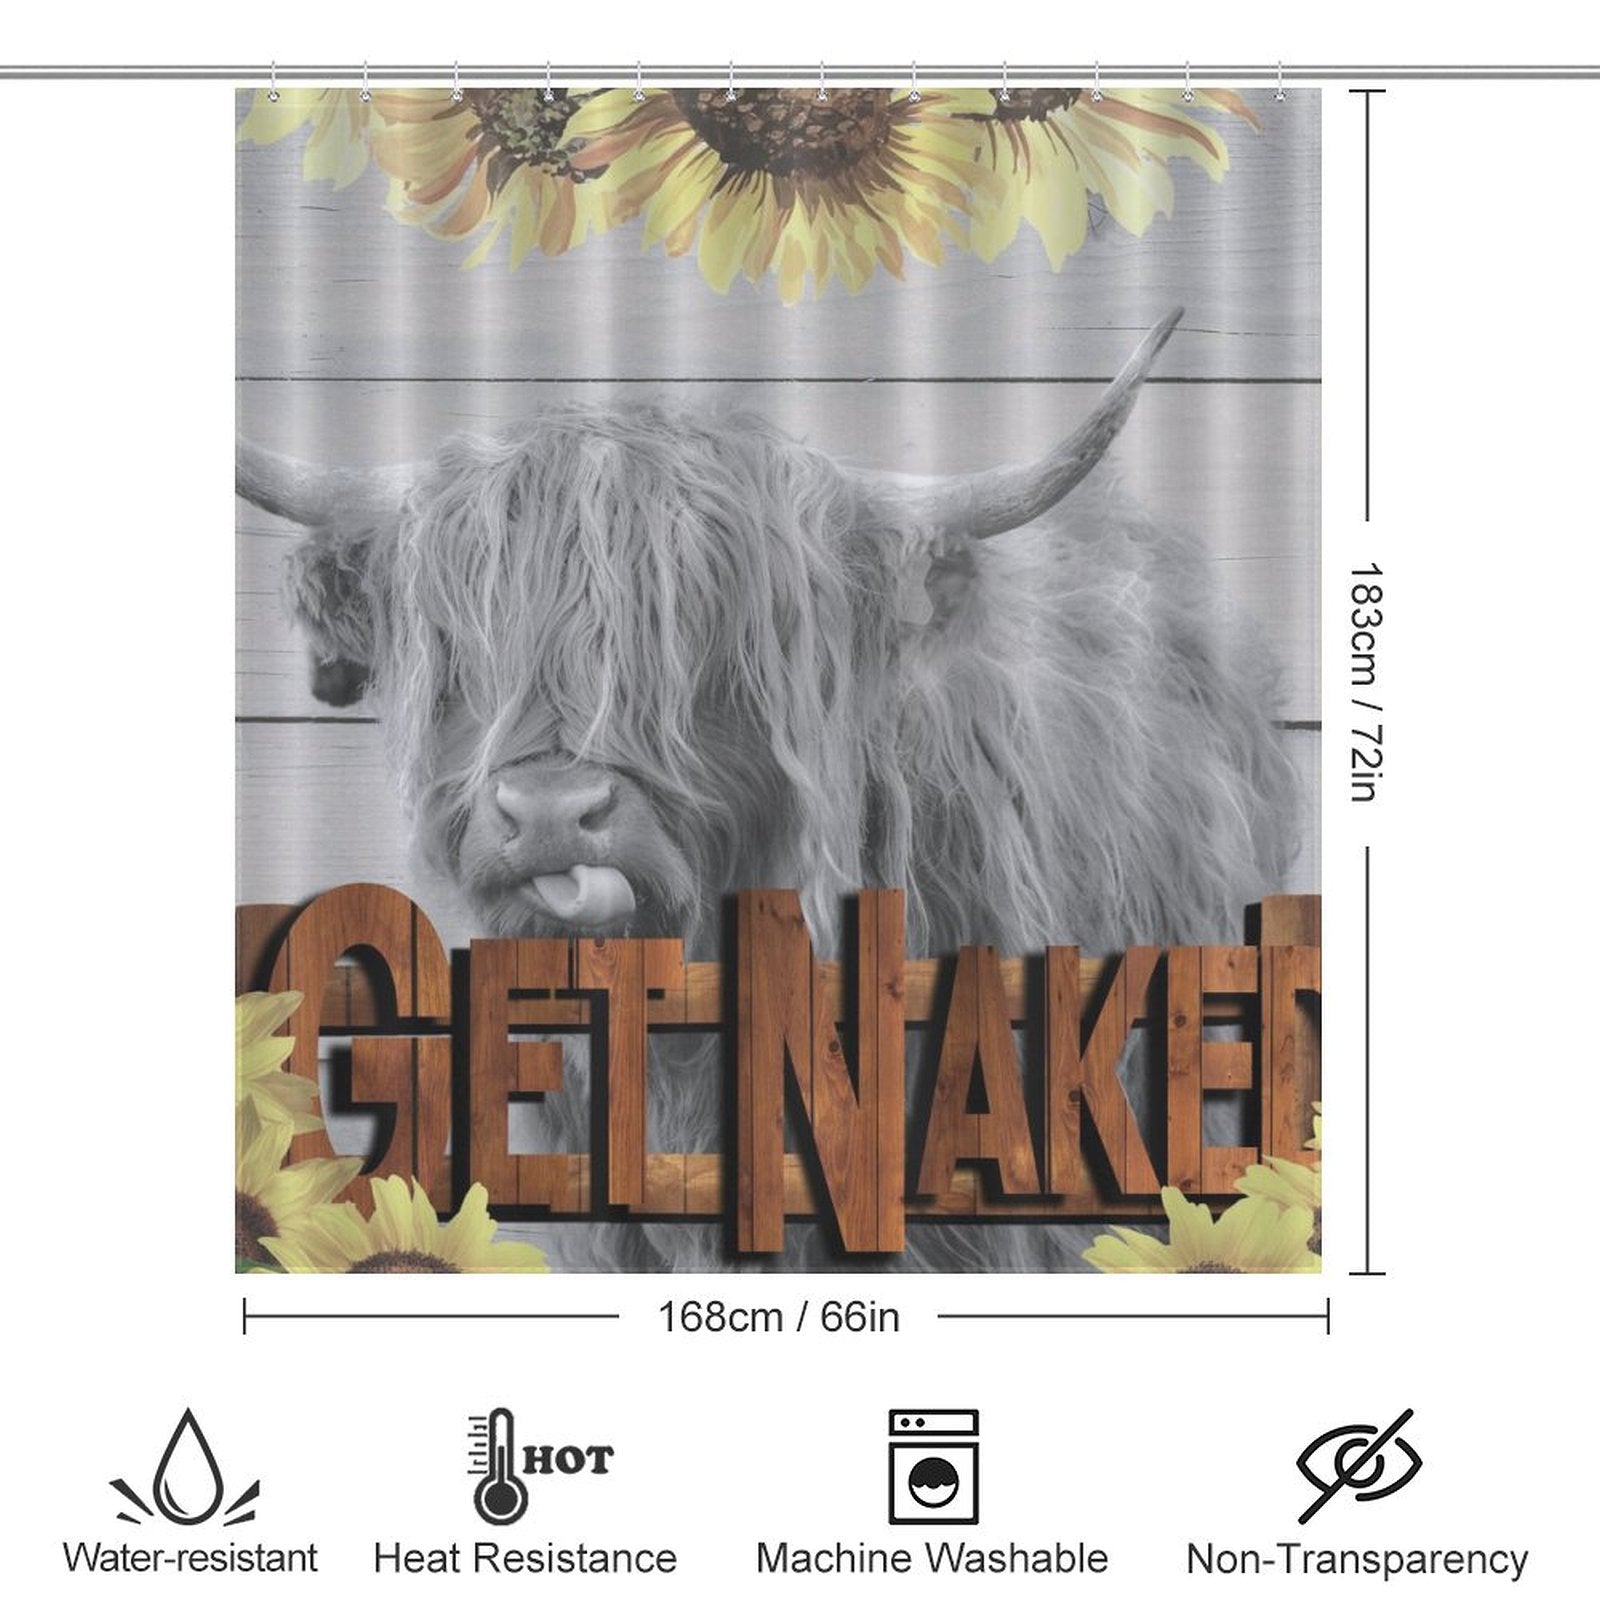 The Cotton Cat Highland Cow Sunflowers Get Naked Shower Curtain-Cottoncat featuring a highland cow with the phrase "Get Naked" in wooden letters, surrounded by vibrant sunflowers. The curtain measures 183 cm by 168 cm, is water-resistant, heat-resistant, machine washable, and non-transparent.